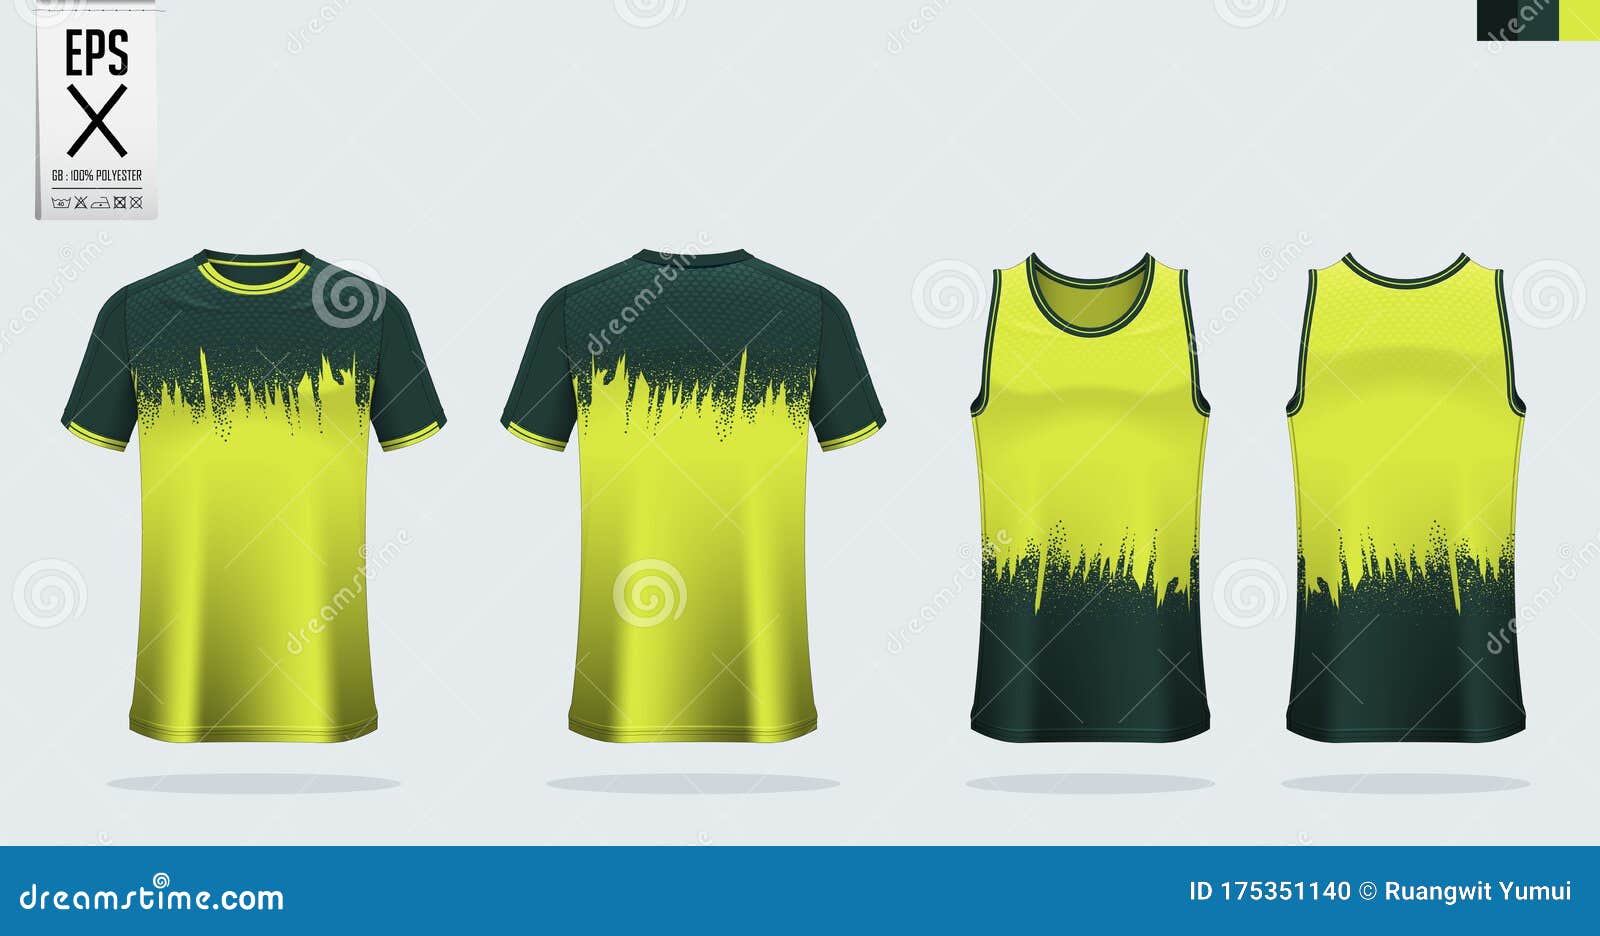 Download T Shirt Mockup Sport Shirt Template Design For Soccer Jersey Football Kit Tank Top For Basketball Jersey And Running Singlet Stock Vector Illustration Of Sign Jersey 175351140